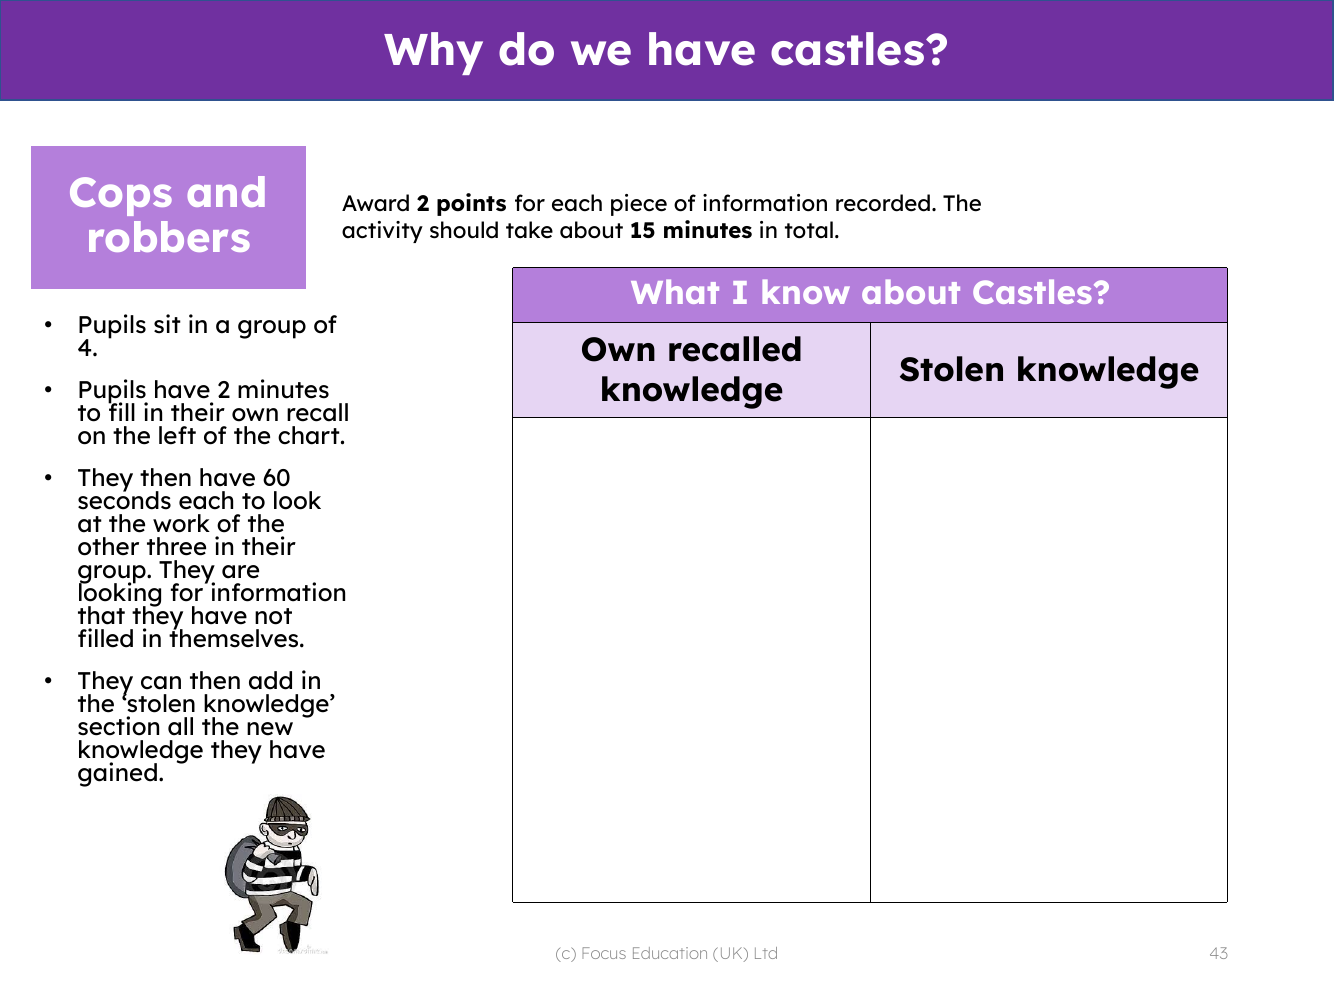 Cops and robbers - What do you know about castles?